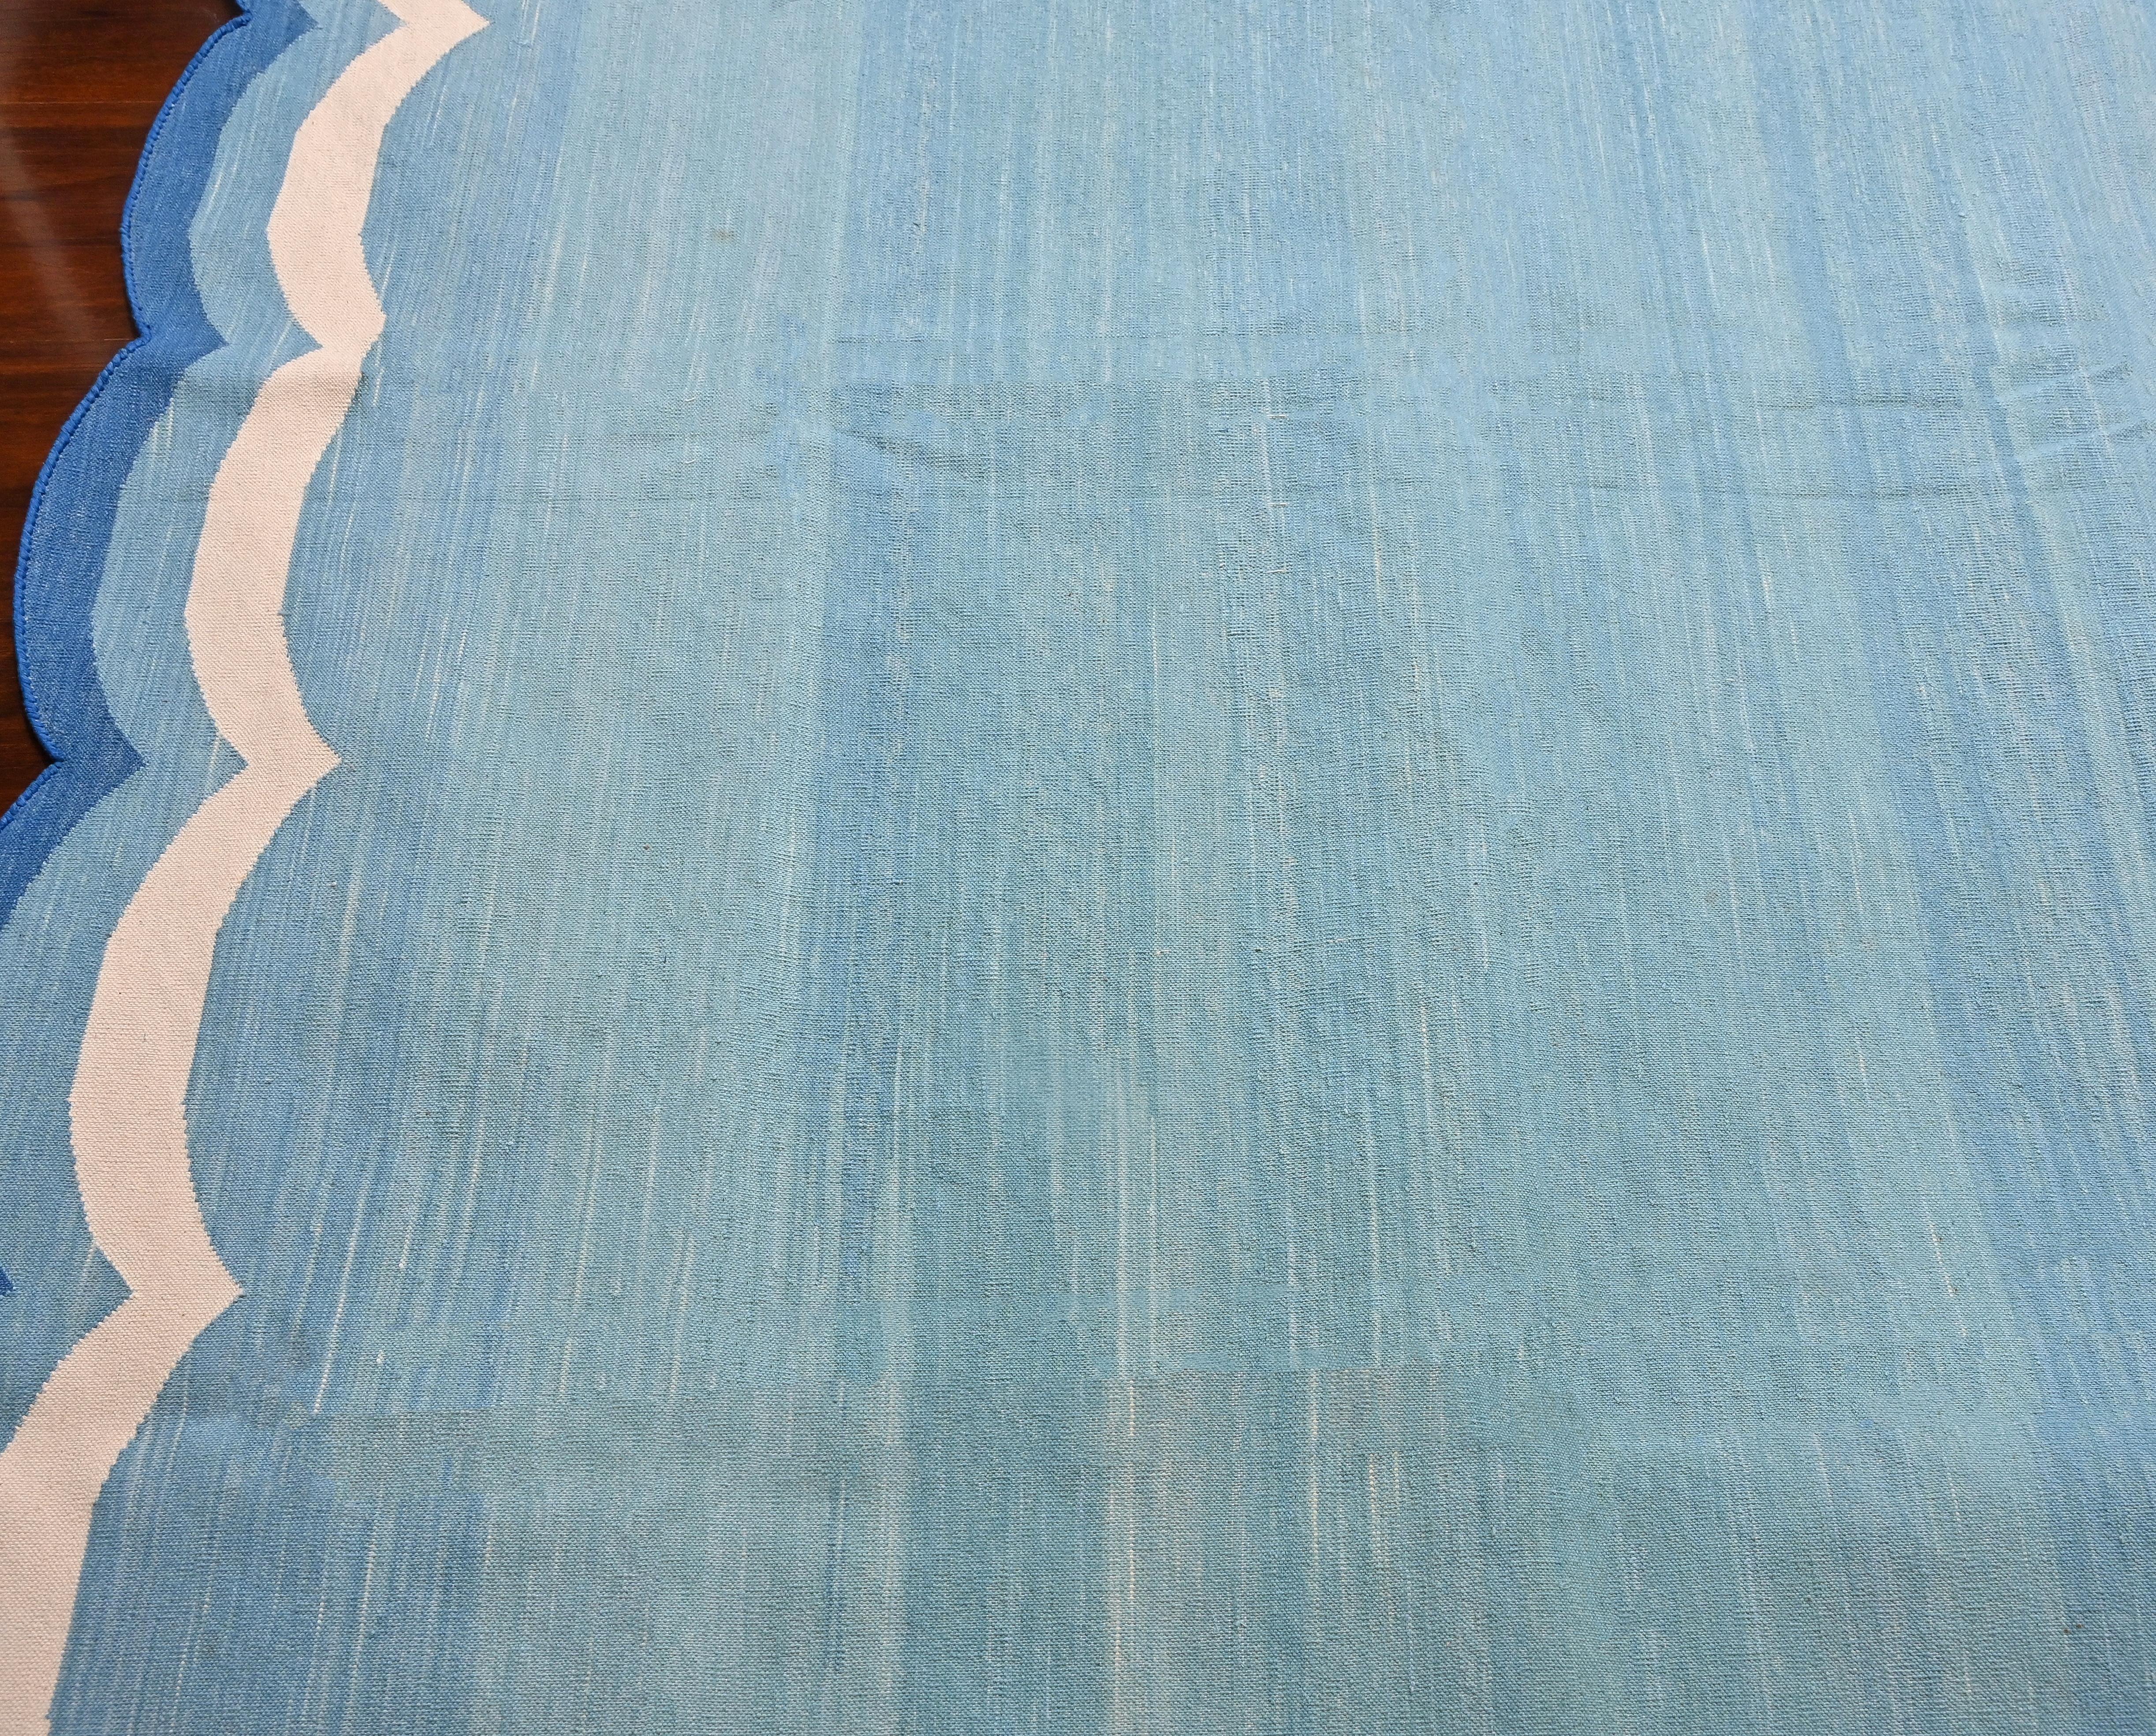 Handmade Cotton Area Flat Weave Rug, Teal Blue And White Scallop Indian Dhurrie In New Condition For Sale In Jaipur, IN